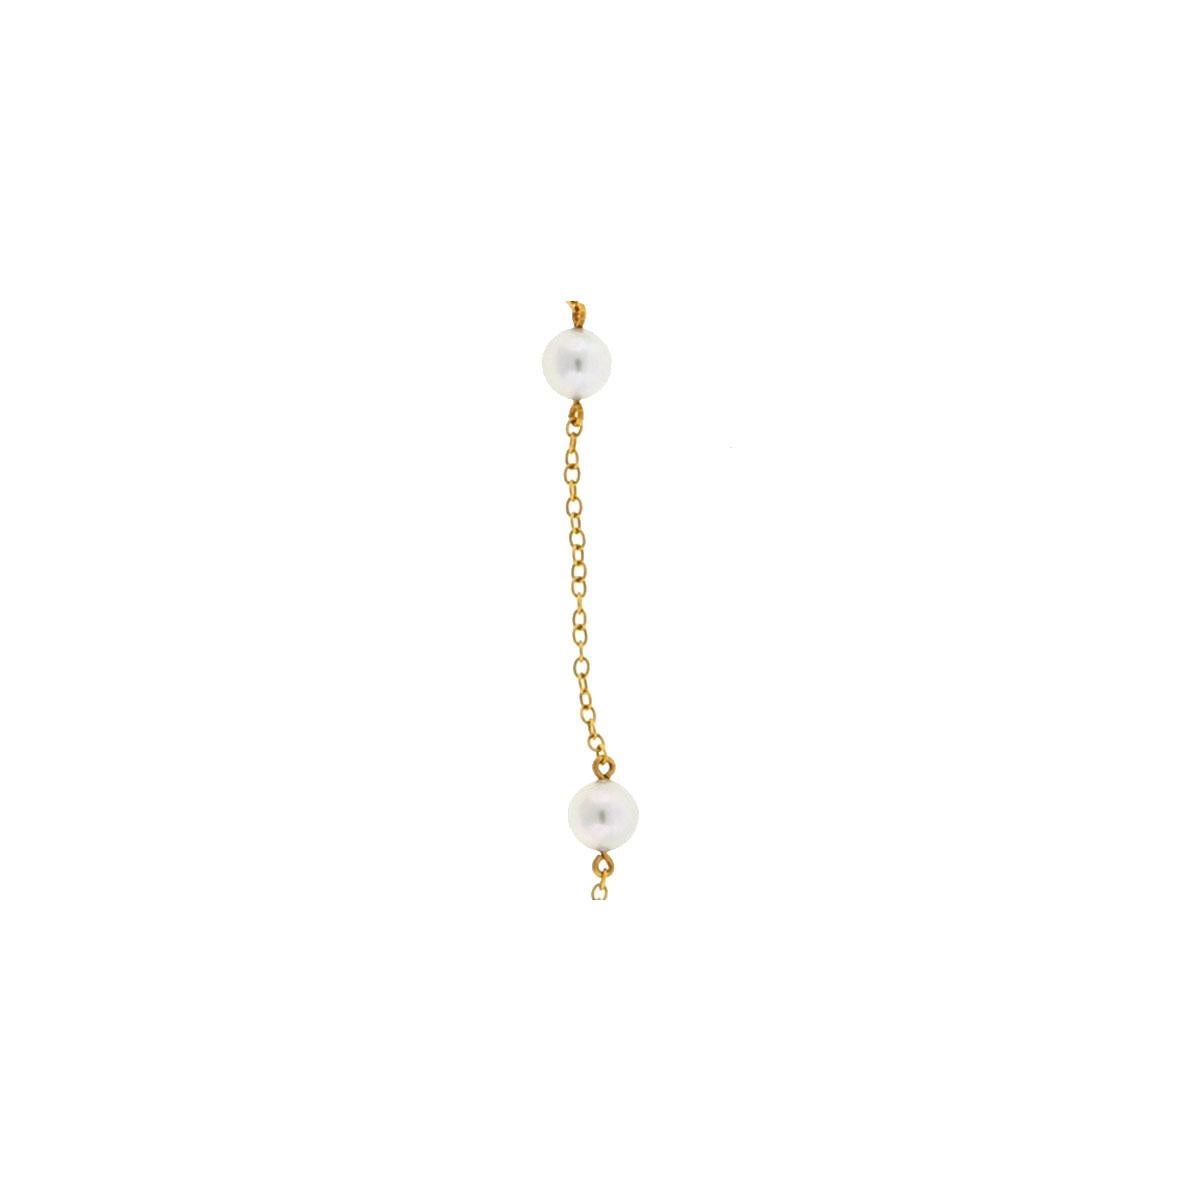 Mikimoto 18 Karat Yellow Gold with White Akoyo Cultured Pearls Station Necklace 2